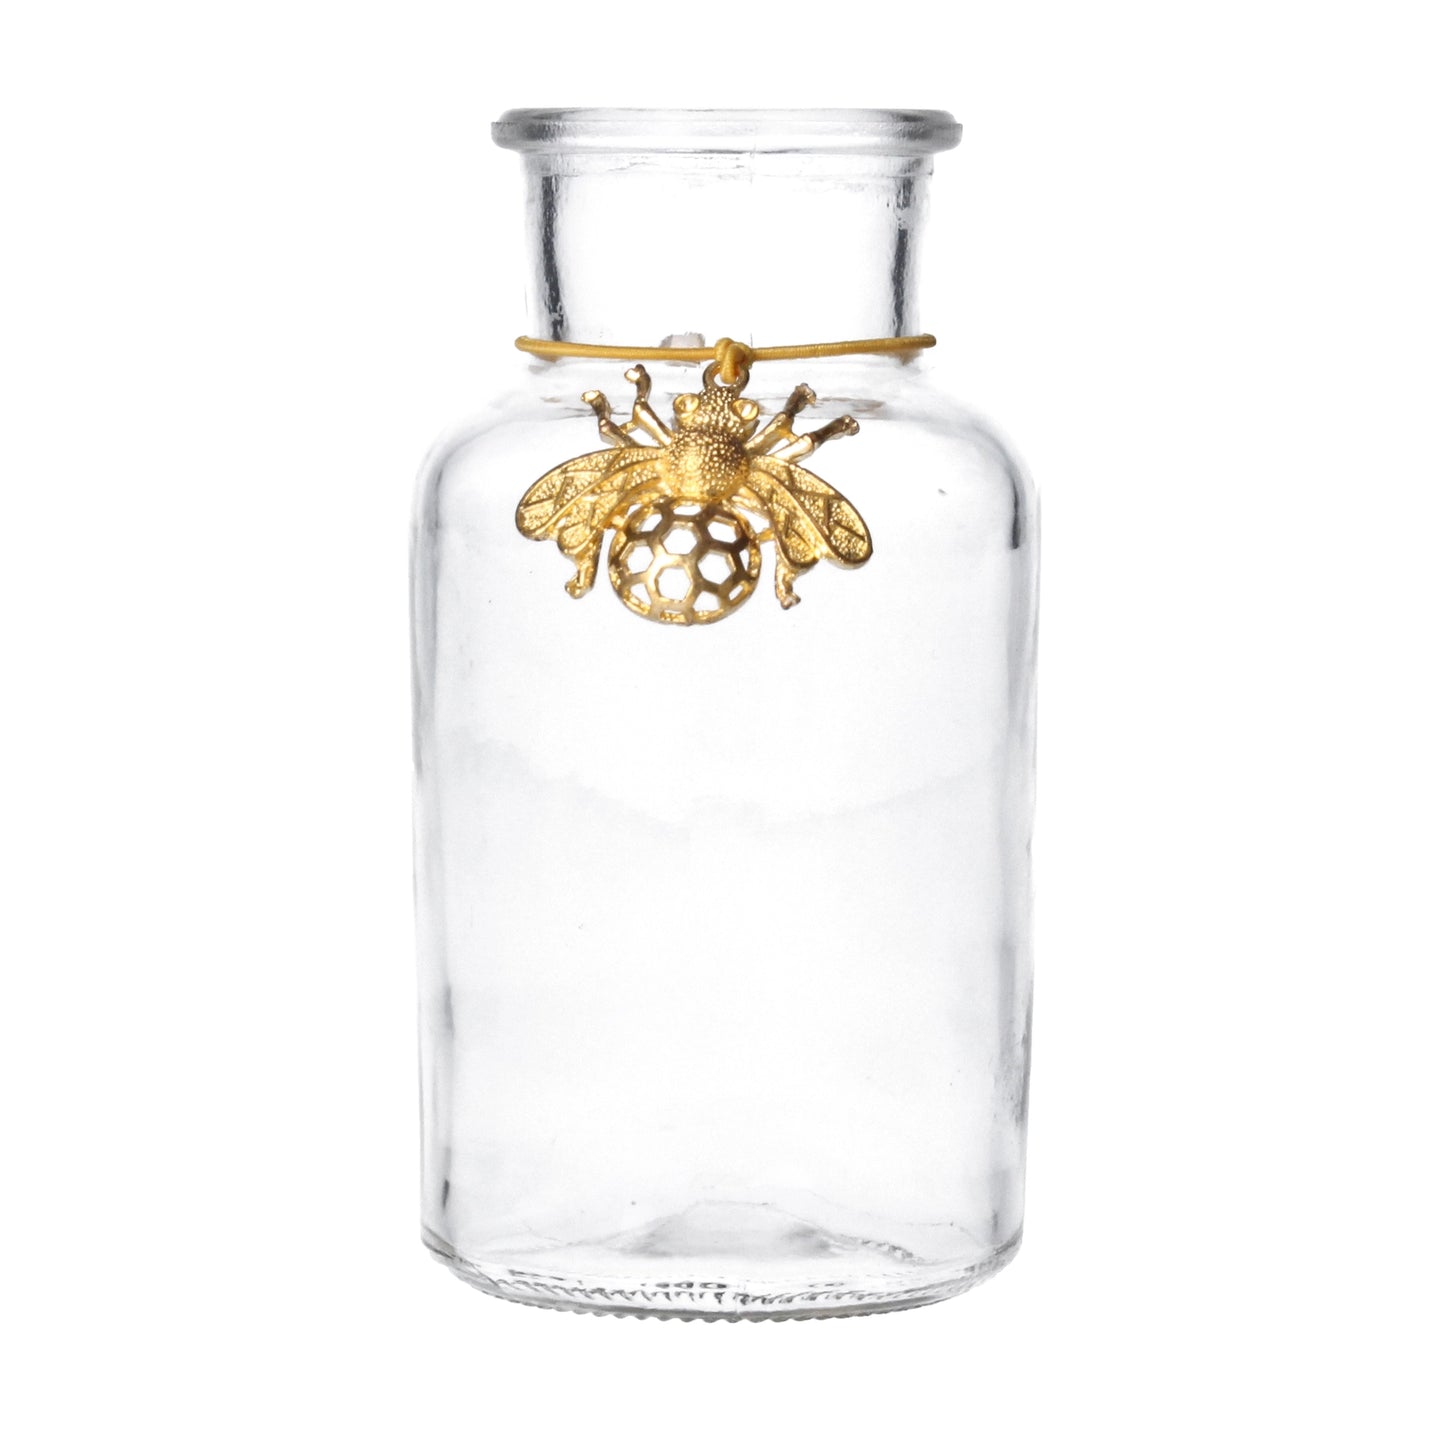 Glass Mini Bottle Vase with Gold Bee Charm